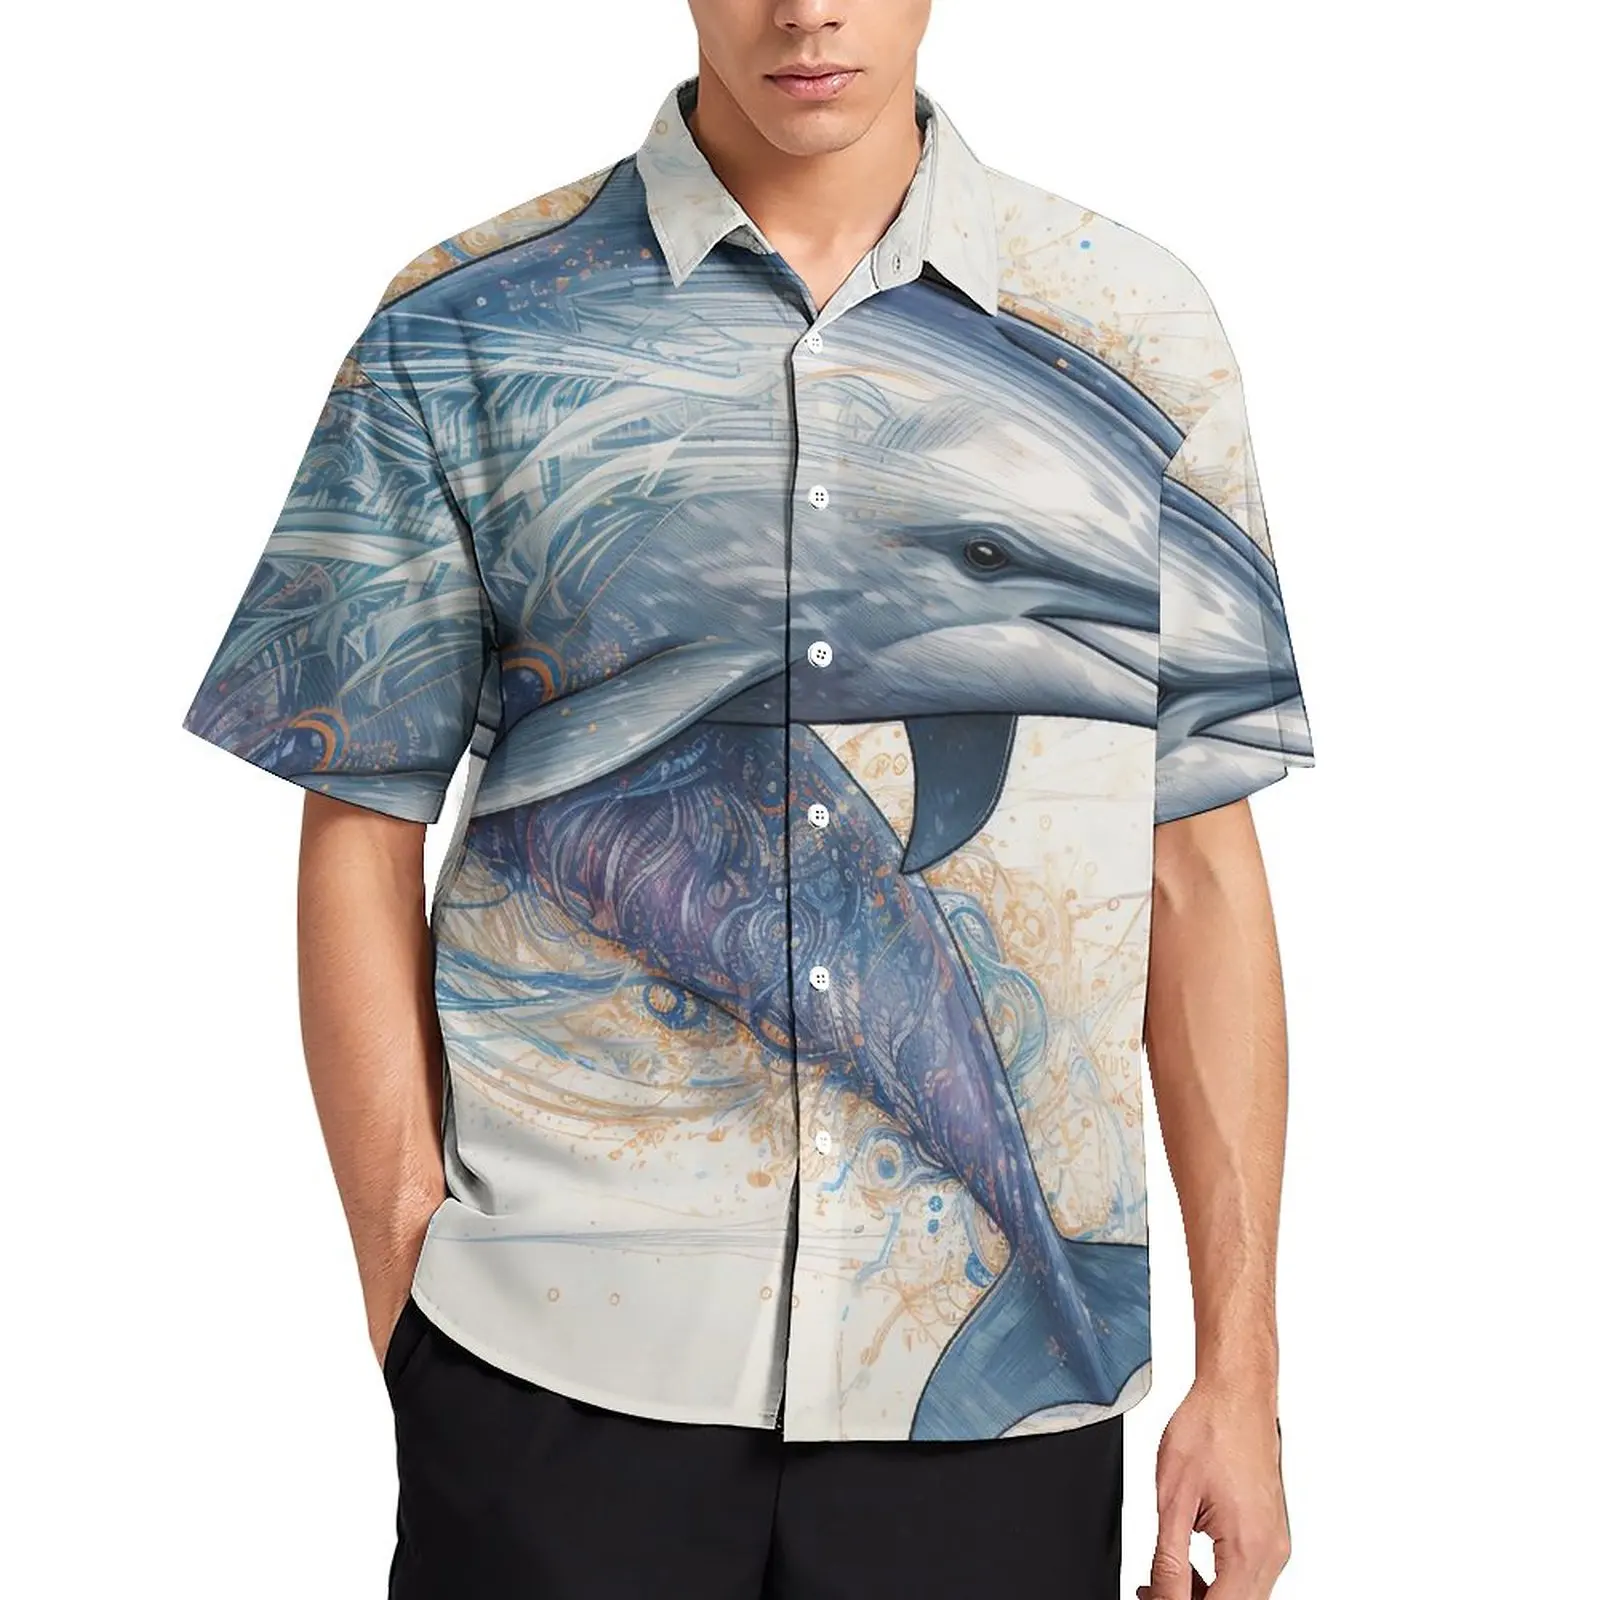 

Dolphin Casual Shirt Realistic Cartoon Beach Loose Shirt Summer Aesthetic Blouses Short-Sleeve Pattern Oversize Clothing